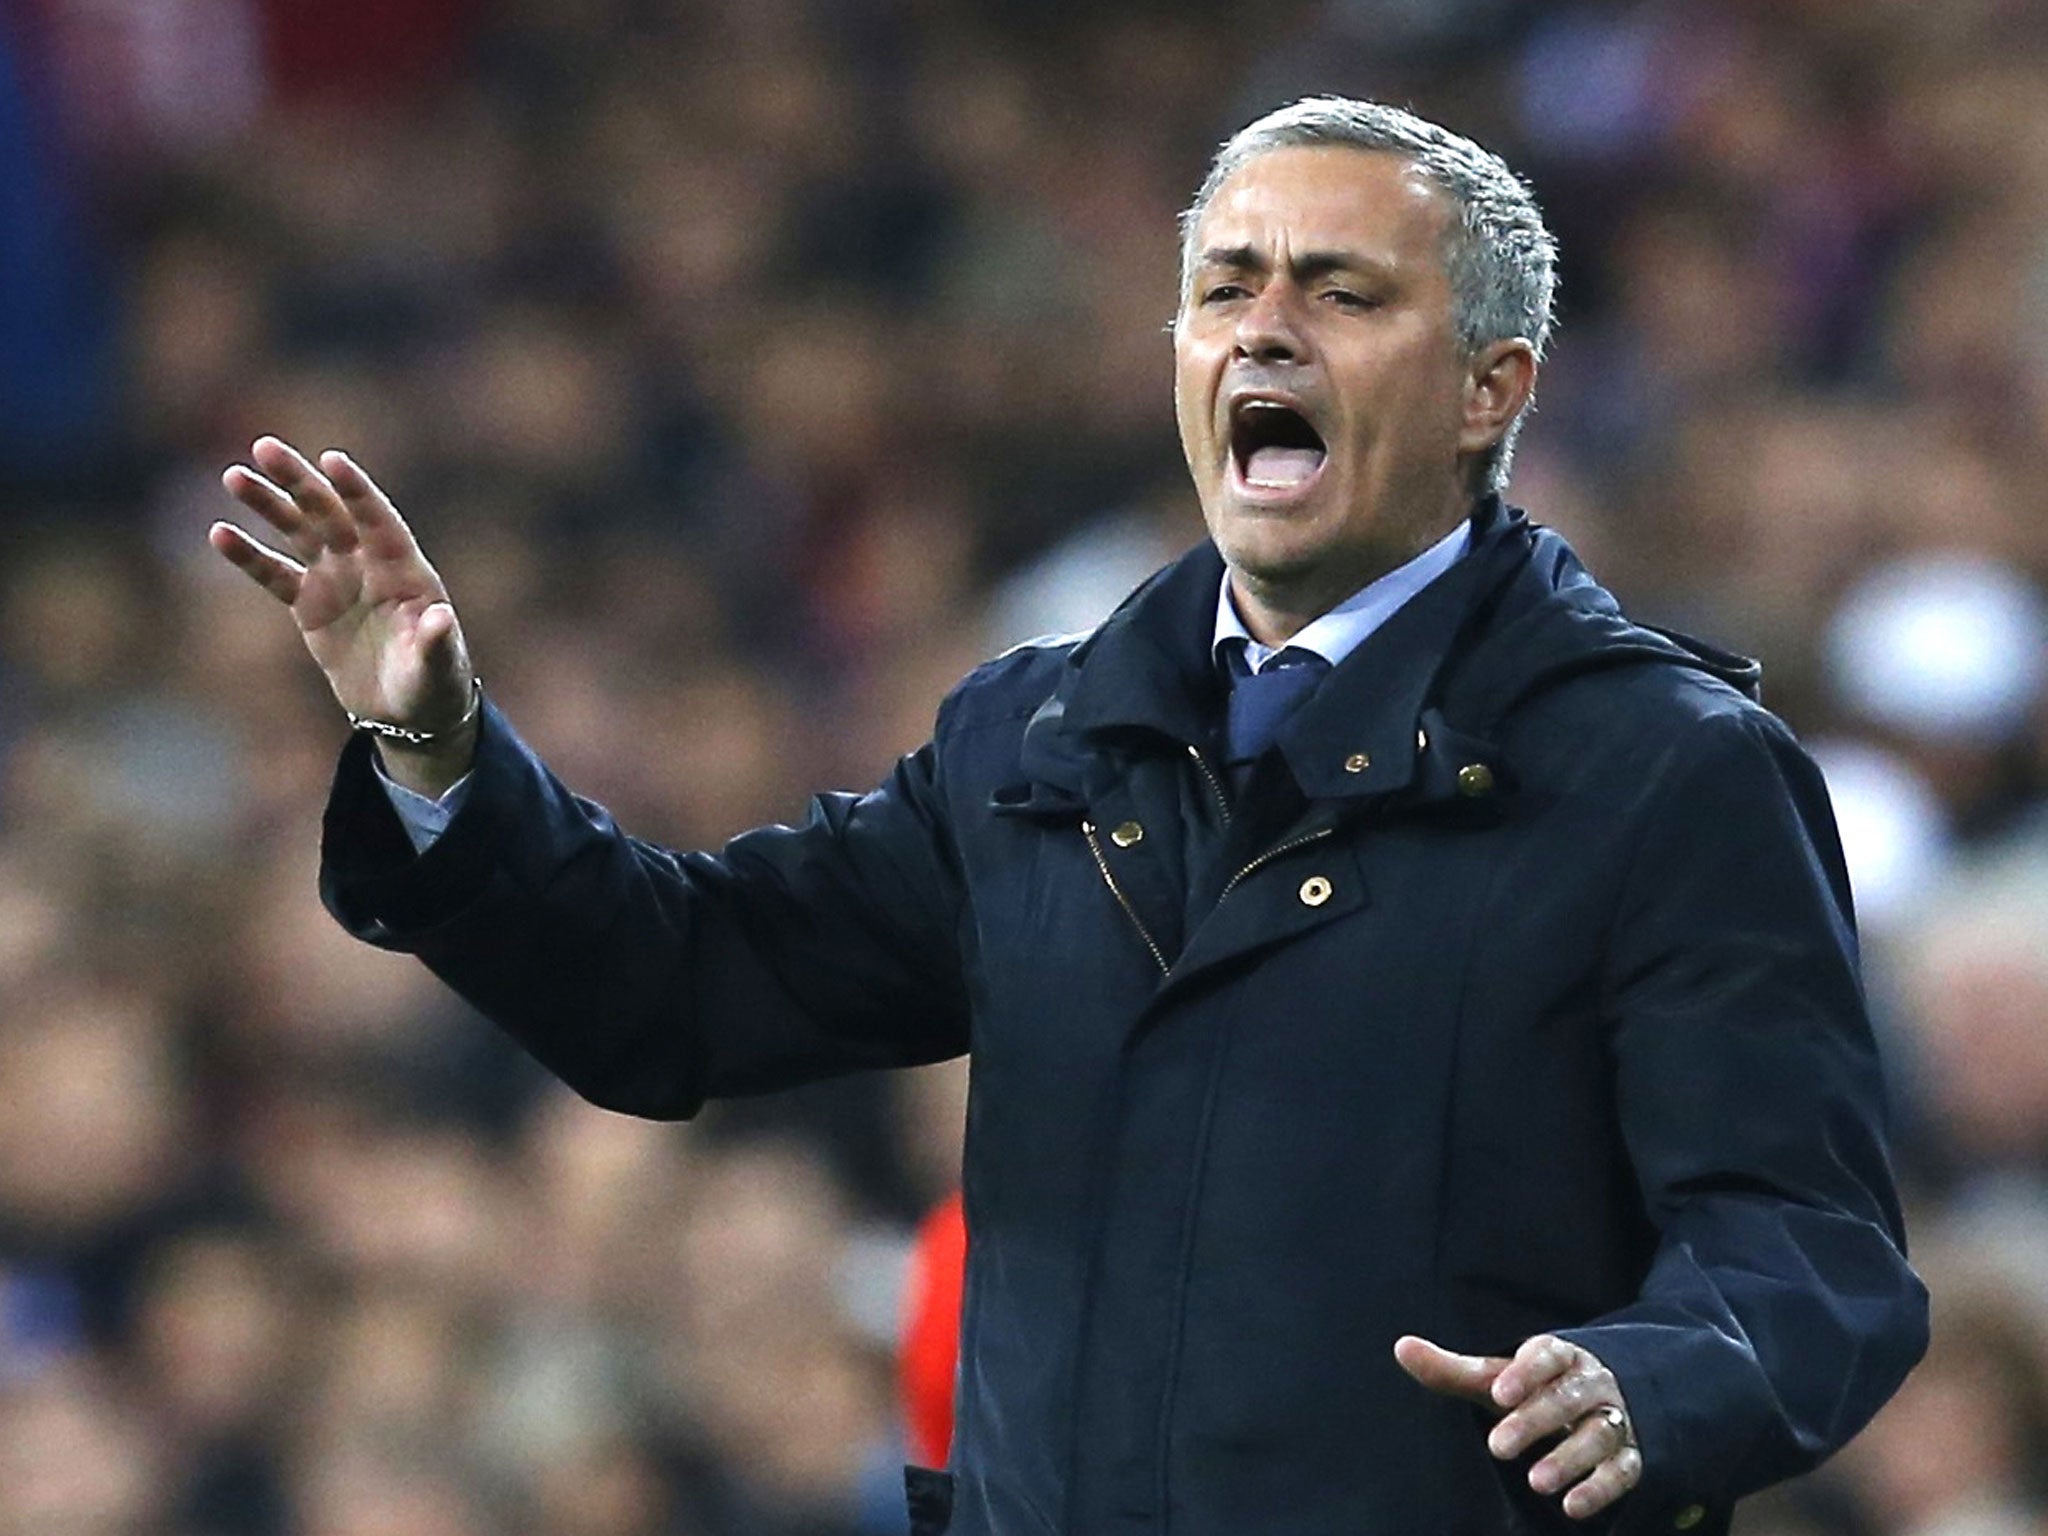 Jose Mourinho’s future appears to be back at Stamford Bridge